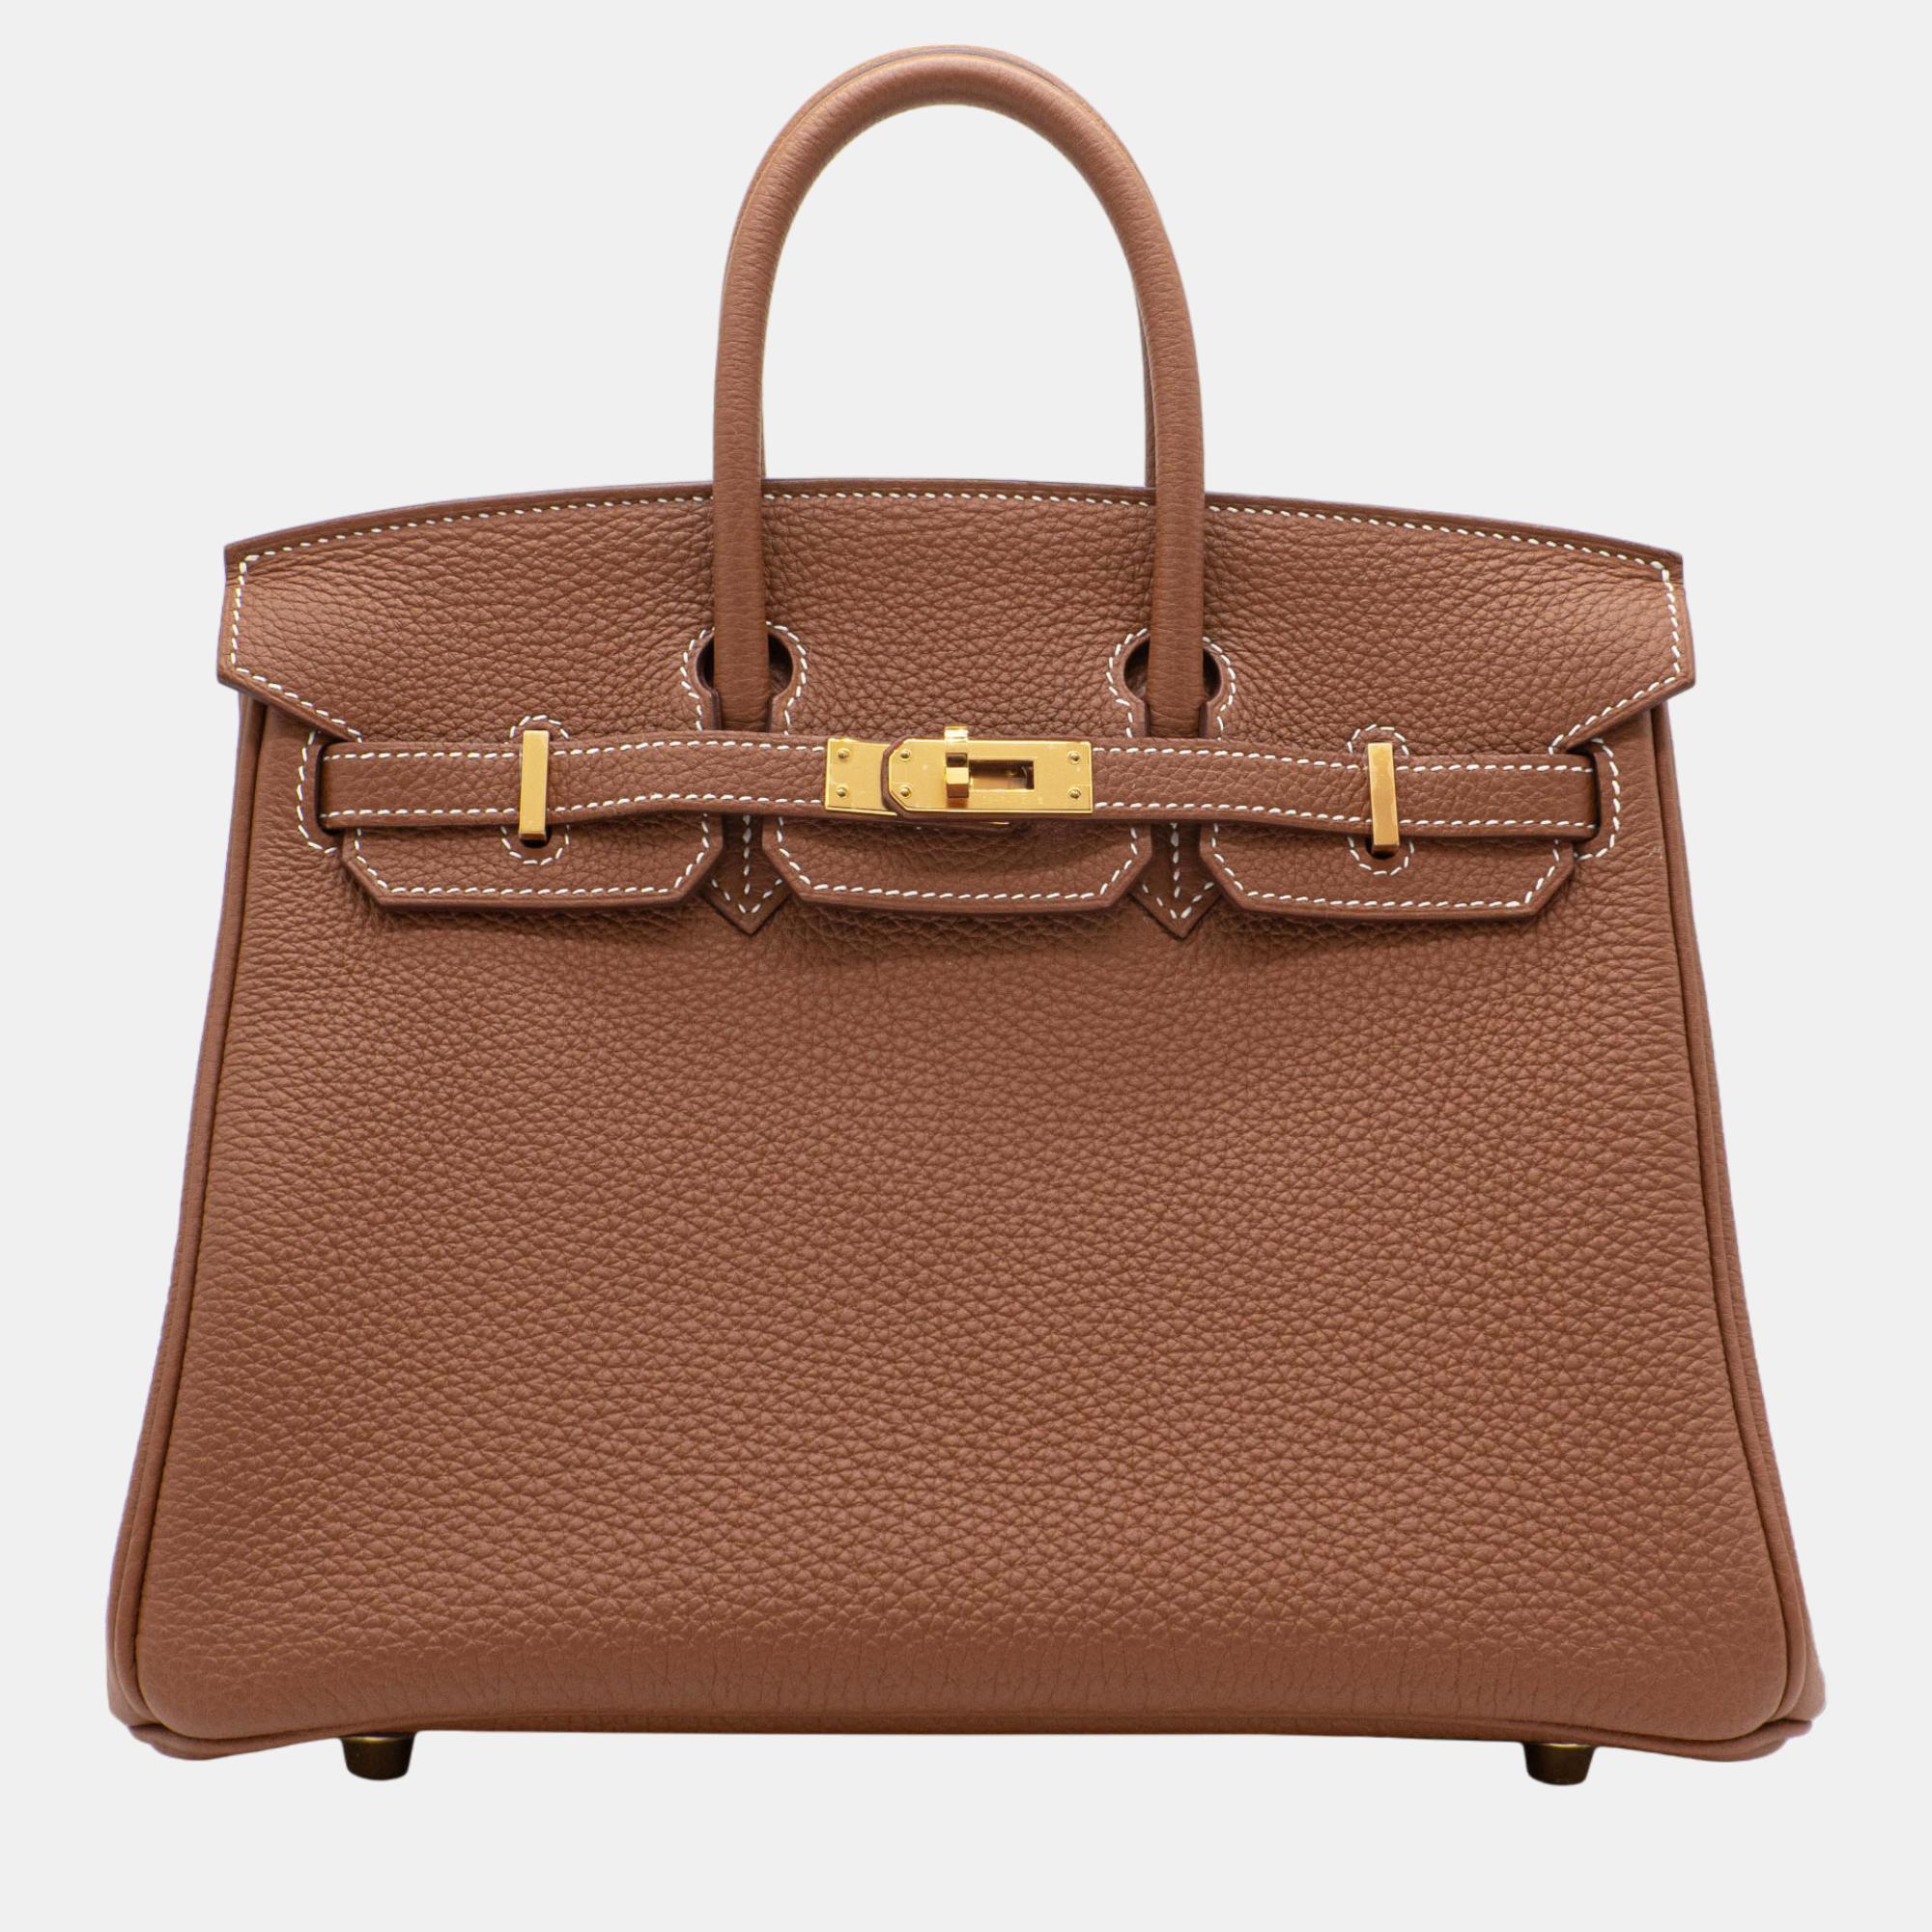 Hermes herm&egrave;s birkin 25 in gold togo leather with ghw bag